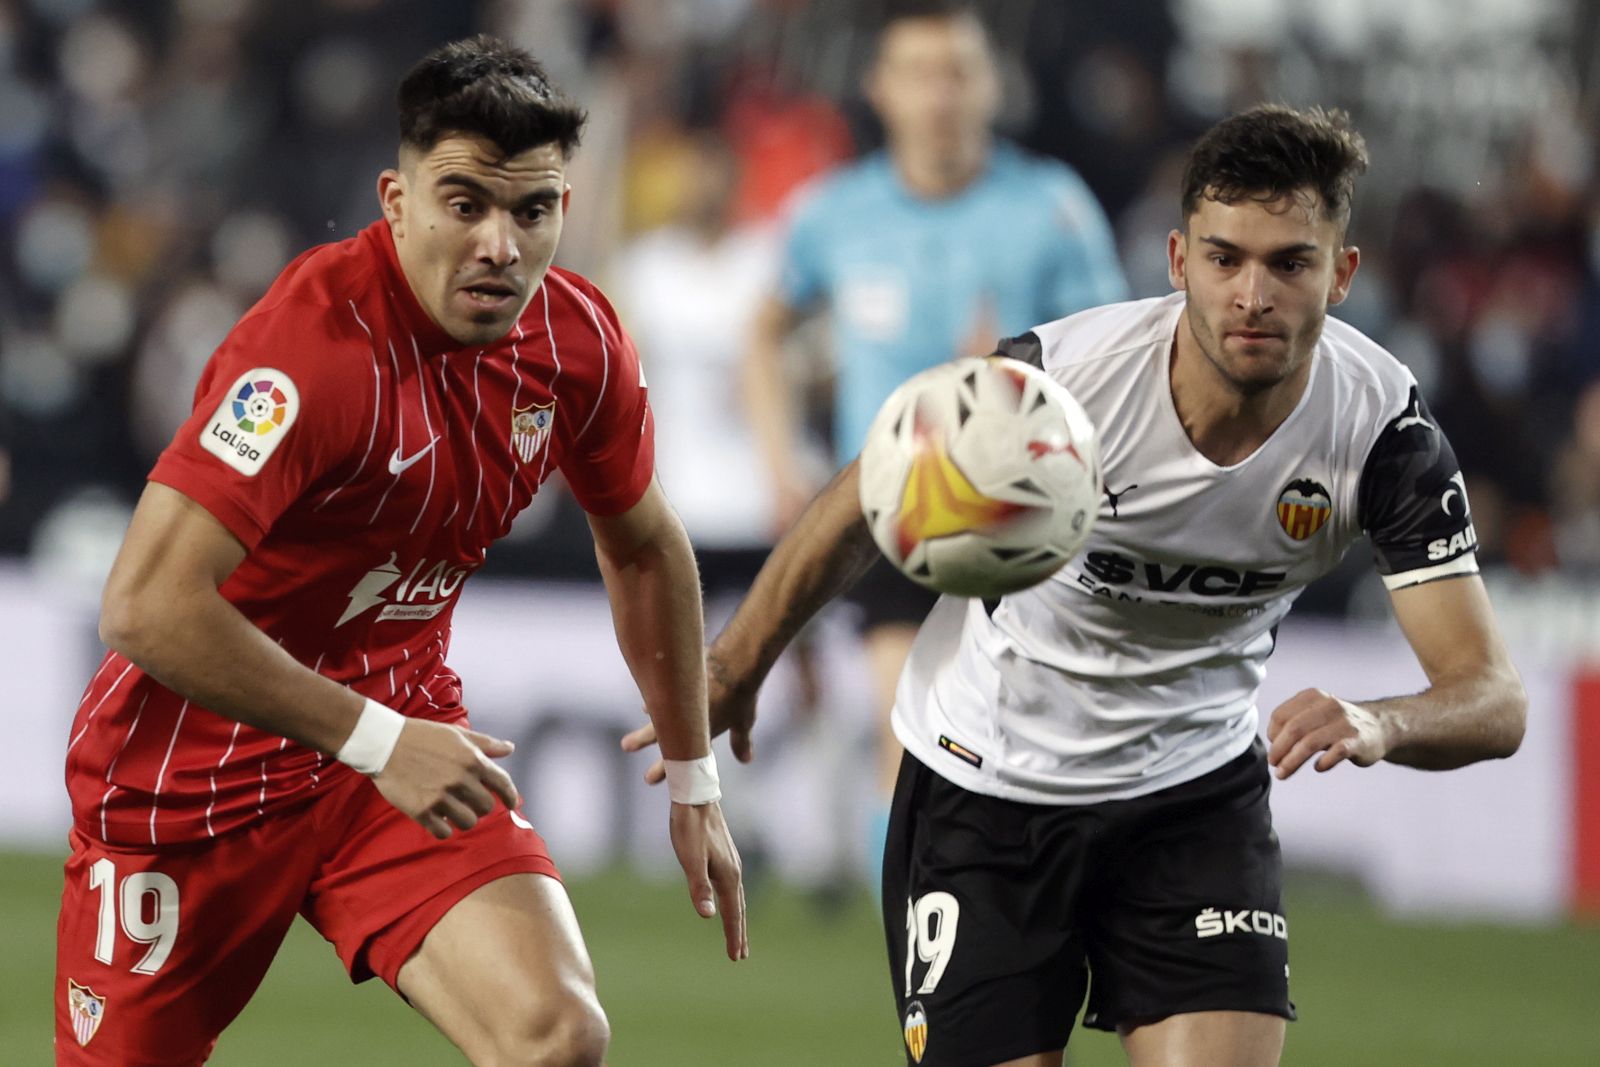 epa09695768 Valencia's Hugo Duro (R) in action against Sevilla's Marcos Acuna (L) during the Spanish LaLiga soccer match between Valencia CF and Sevilla FC in Valencia, eastern Spain, 19 January 2022.  EPA/Kai Foersterling